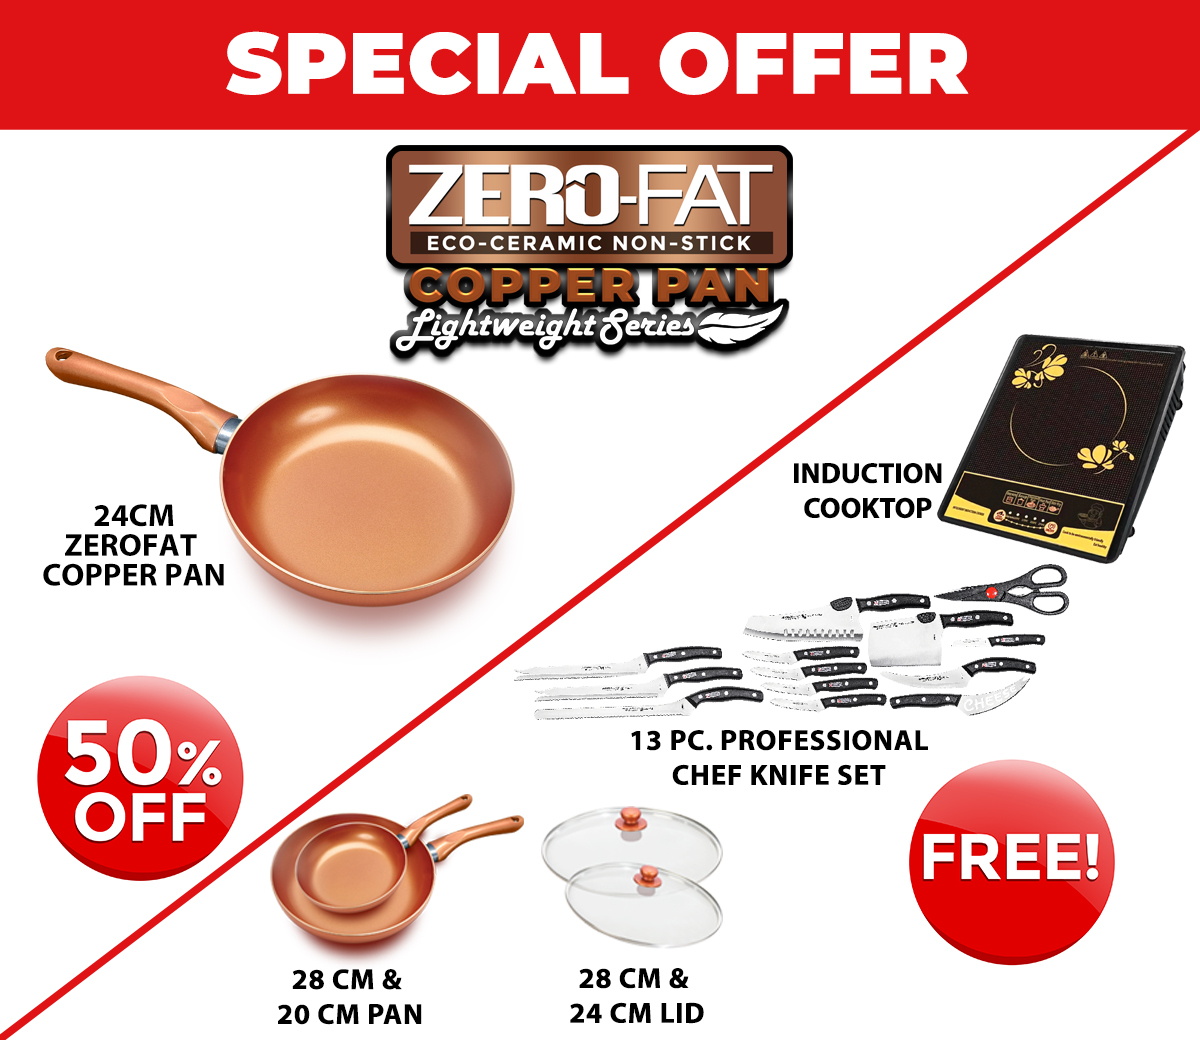 zer-fat-copper-series-special-offer